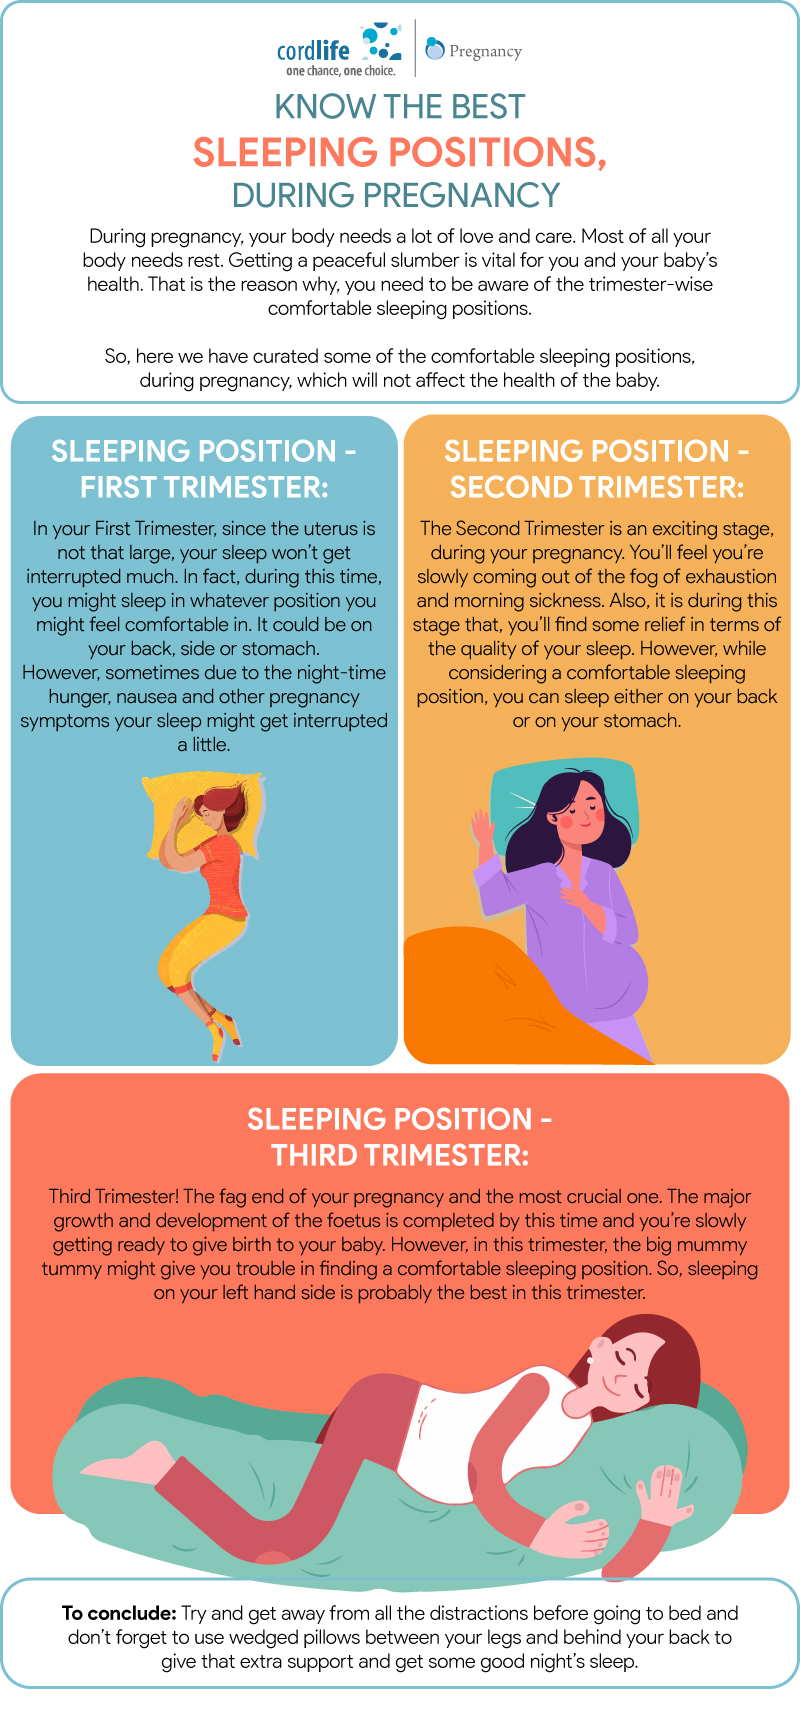 Know the best sleeping positions during pregnancy